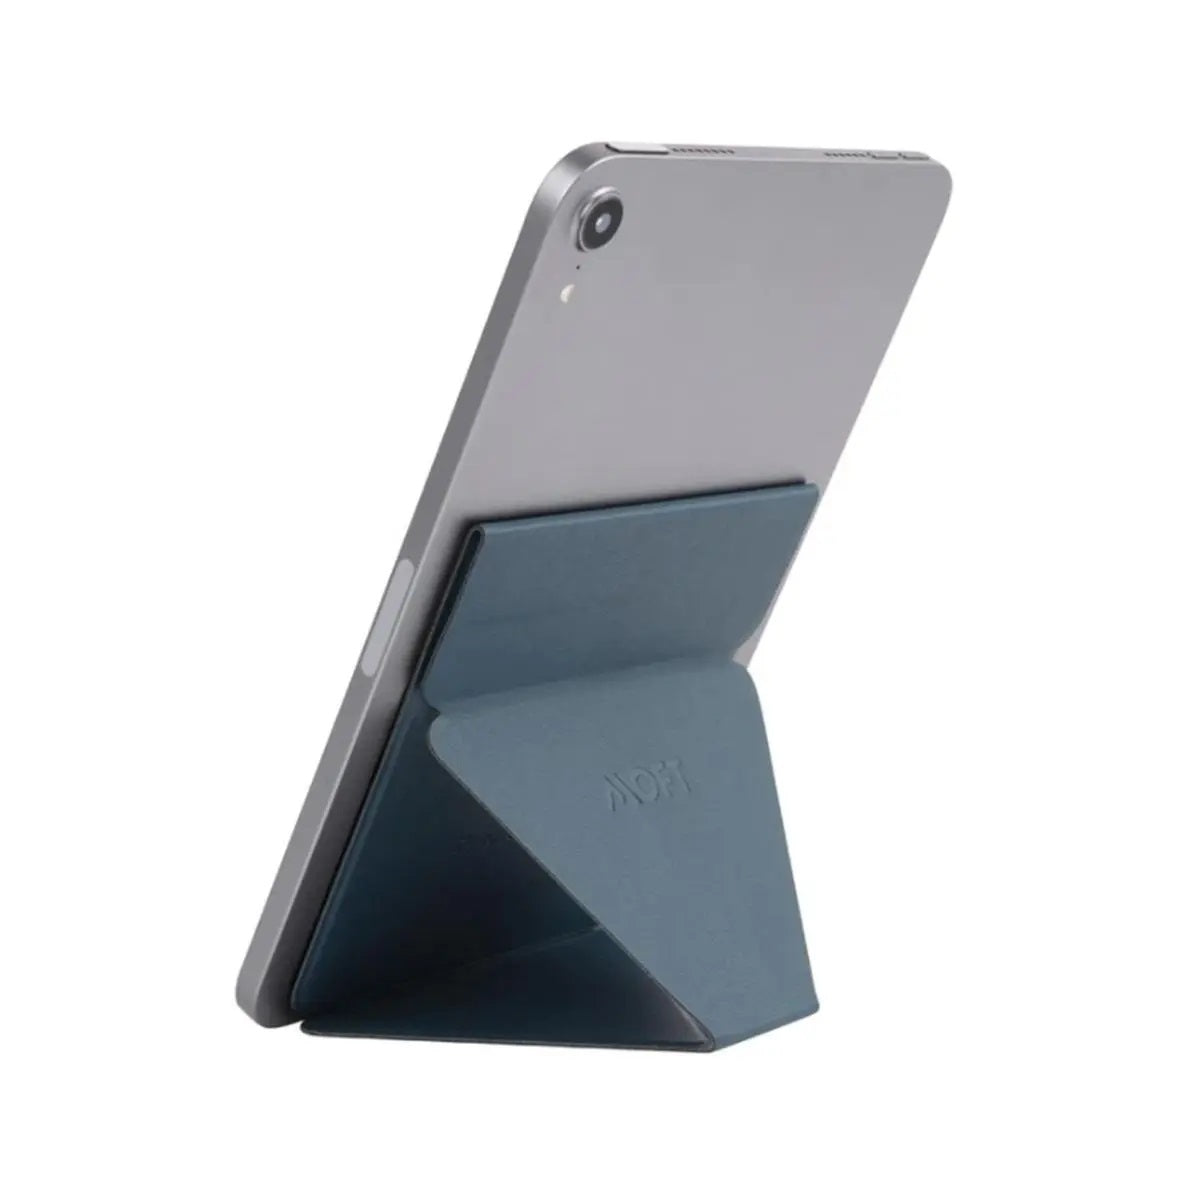 Moft Snap Tablet Stand